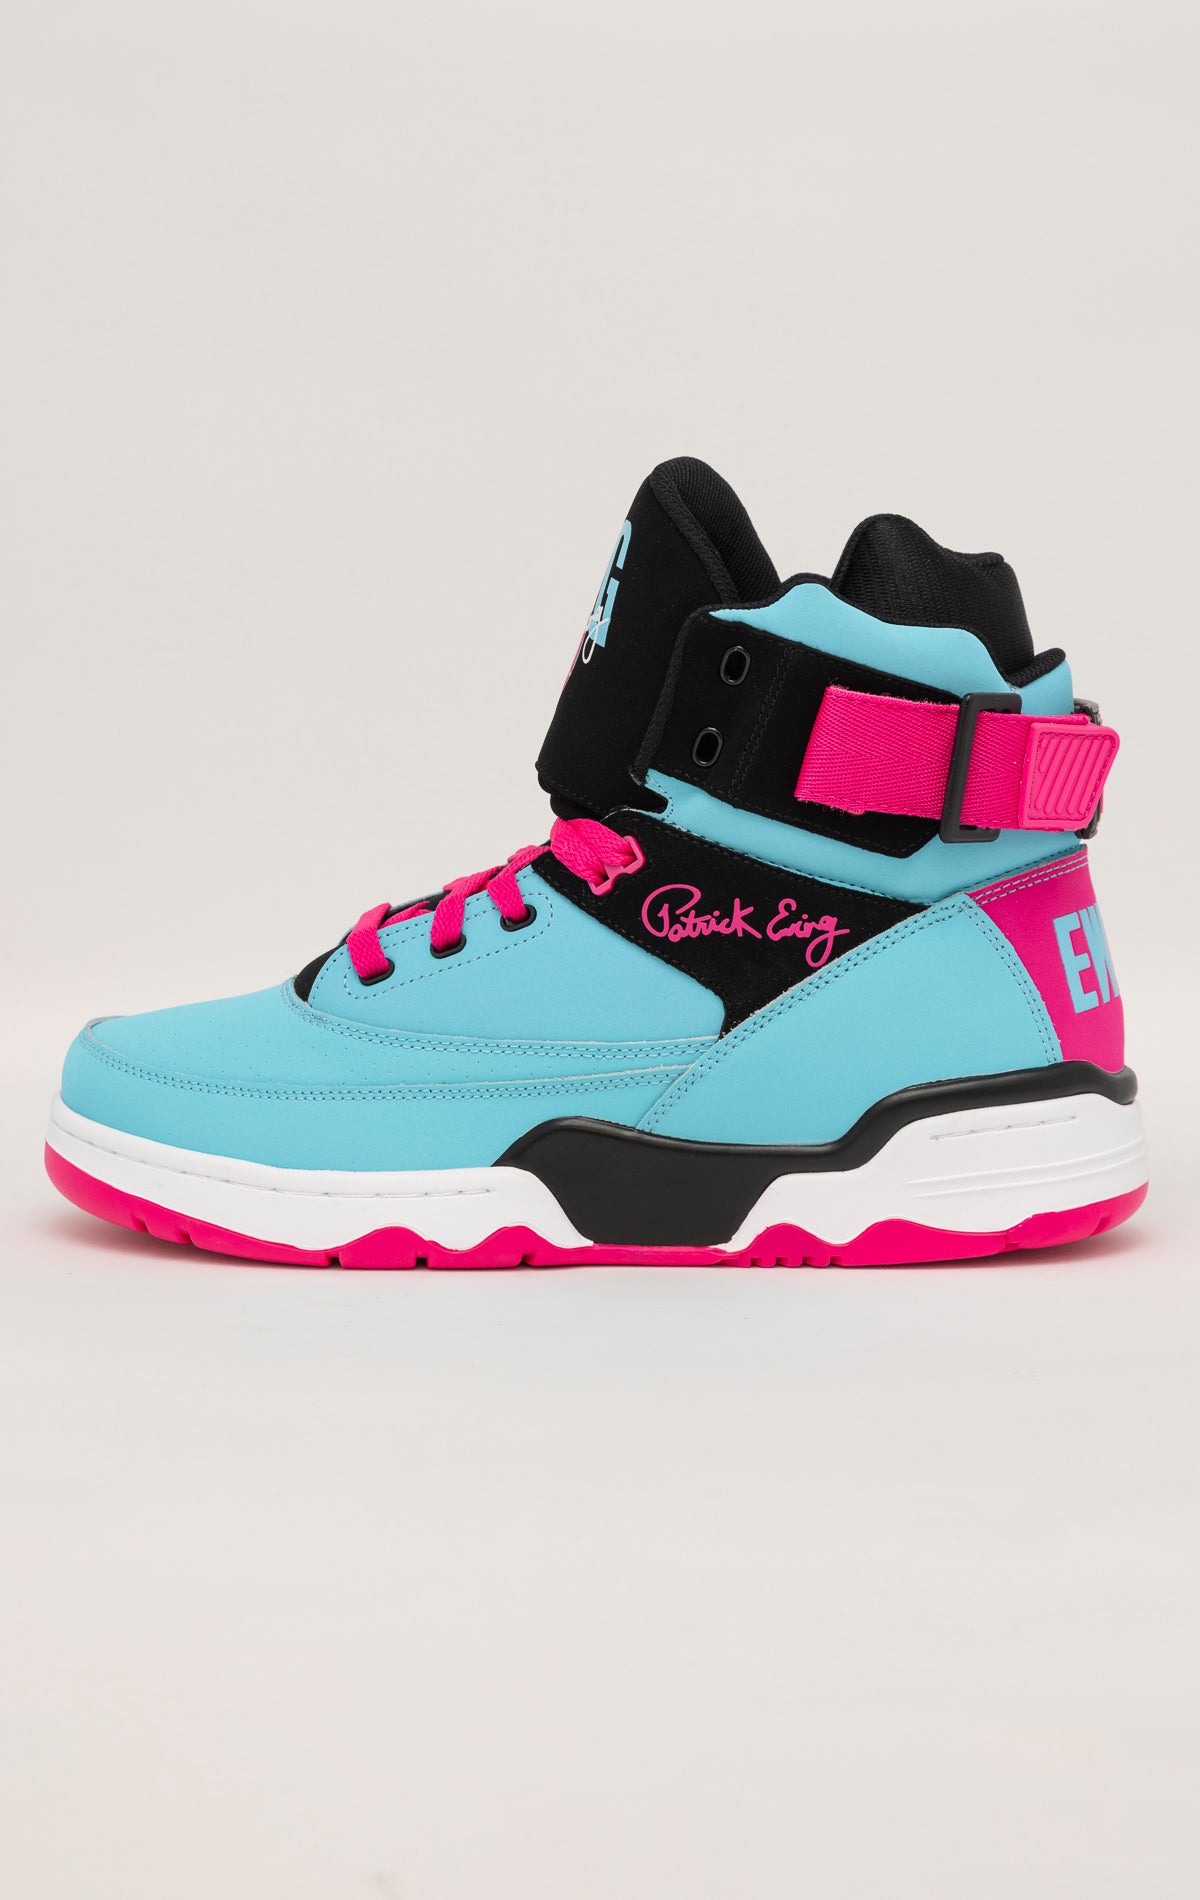 Blue, black, and pink high-top basketball sneakers by Patrick Ewing Athletics. Leather upper, padded collar, and Ewing Athletics logo on the tongue